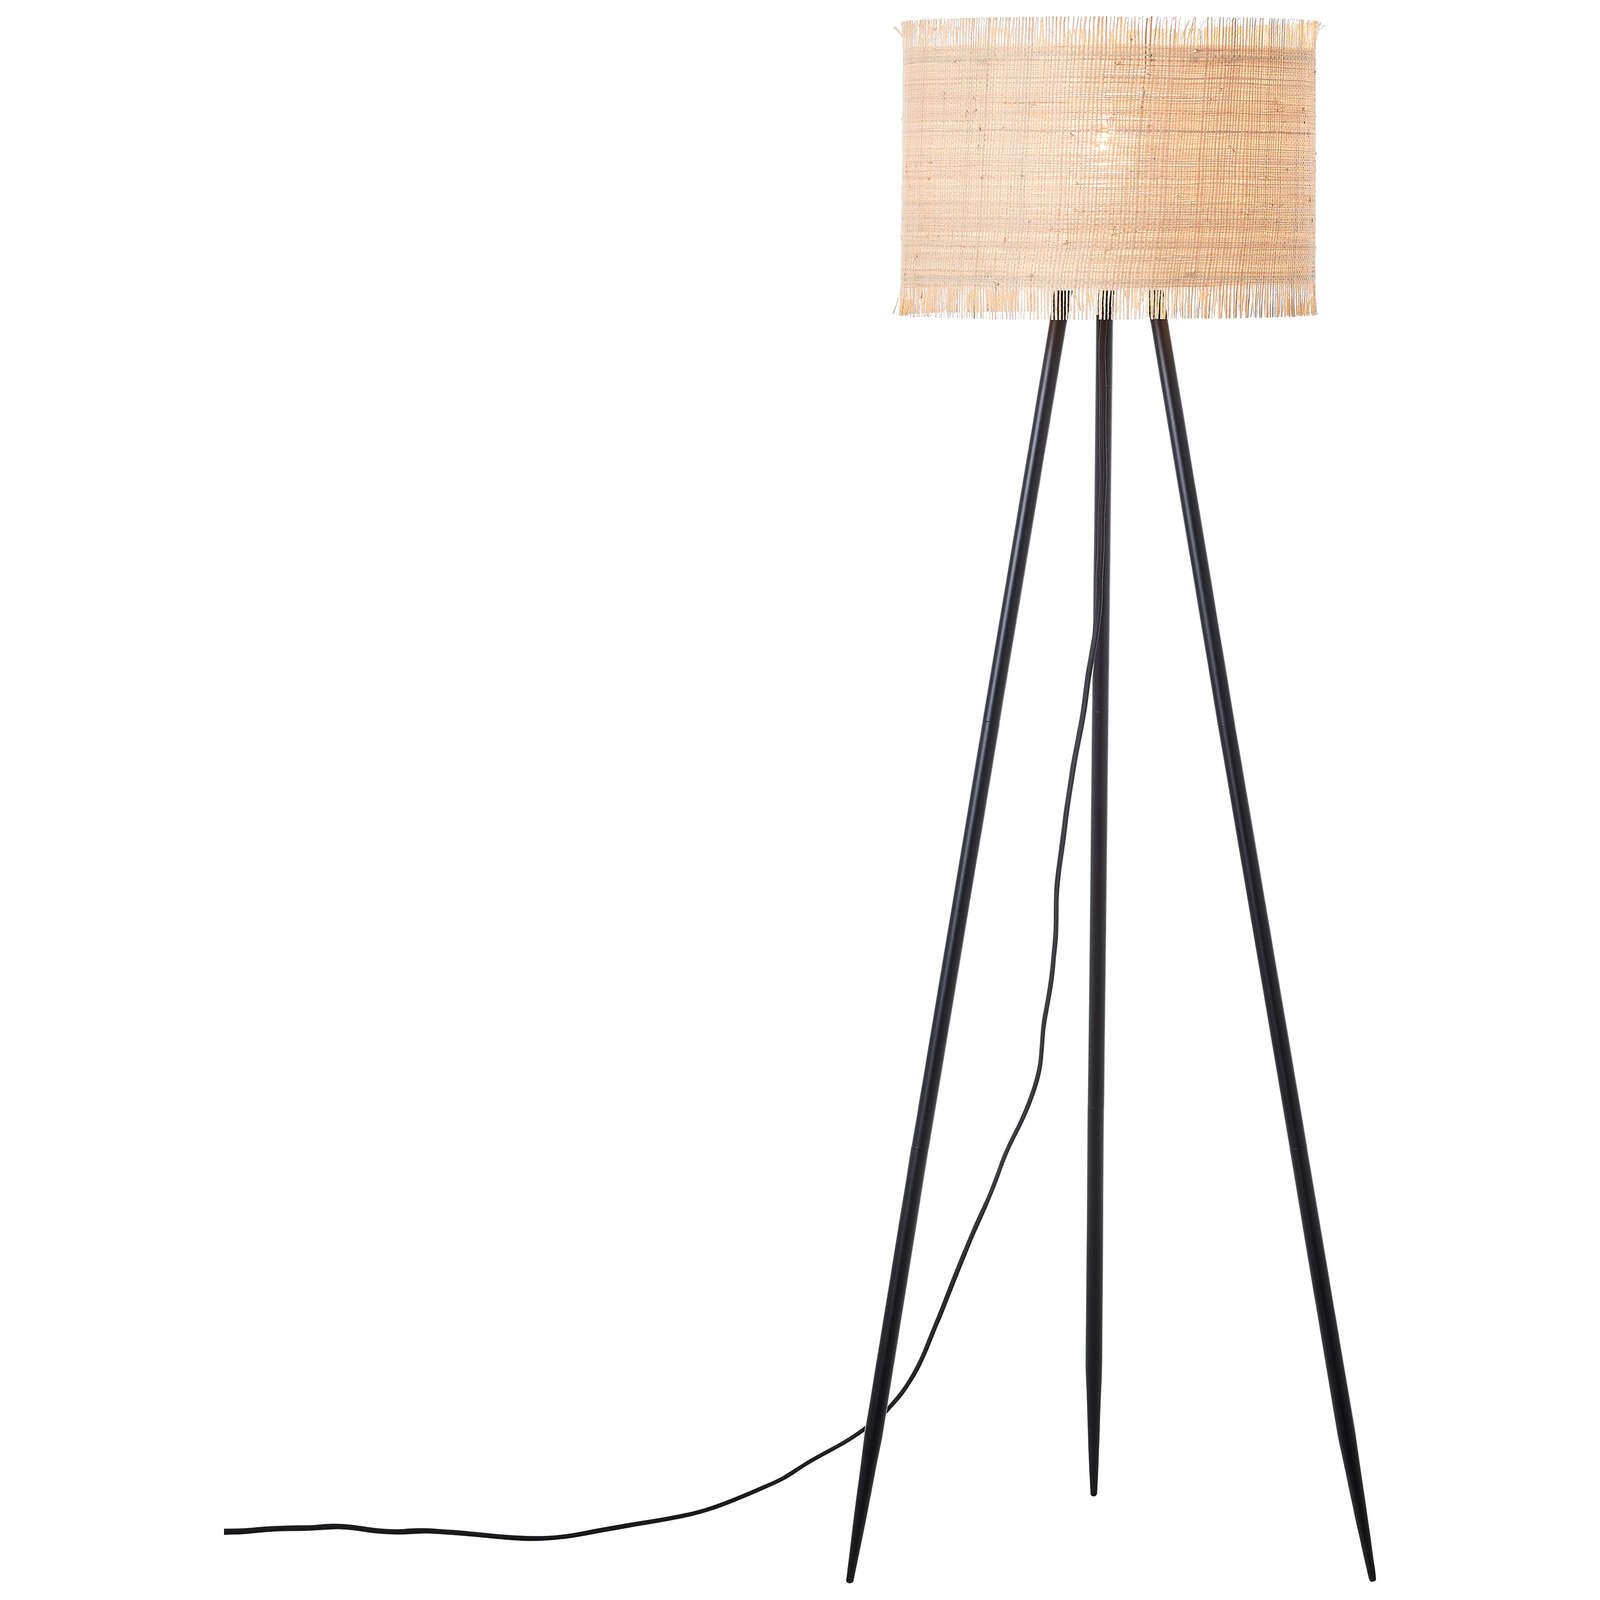             Floor lamp made of seagrass - Mateo 6 - Brown
        